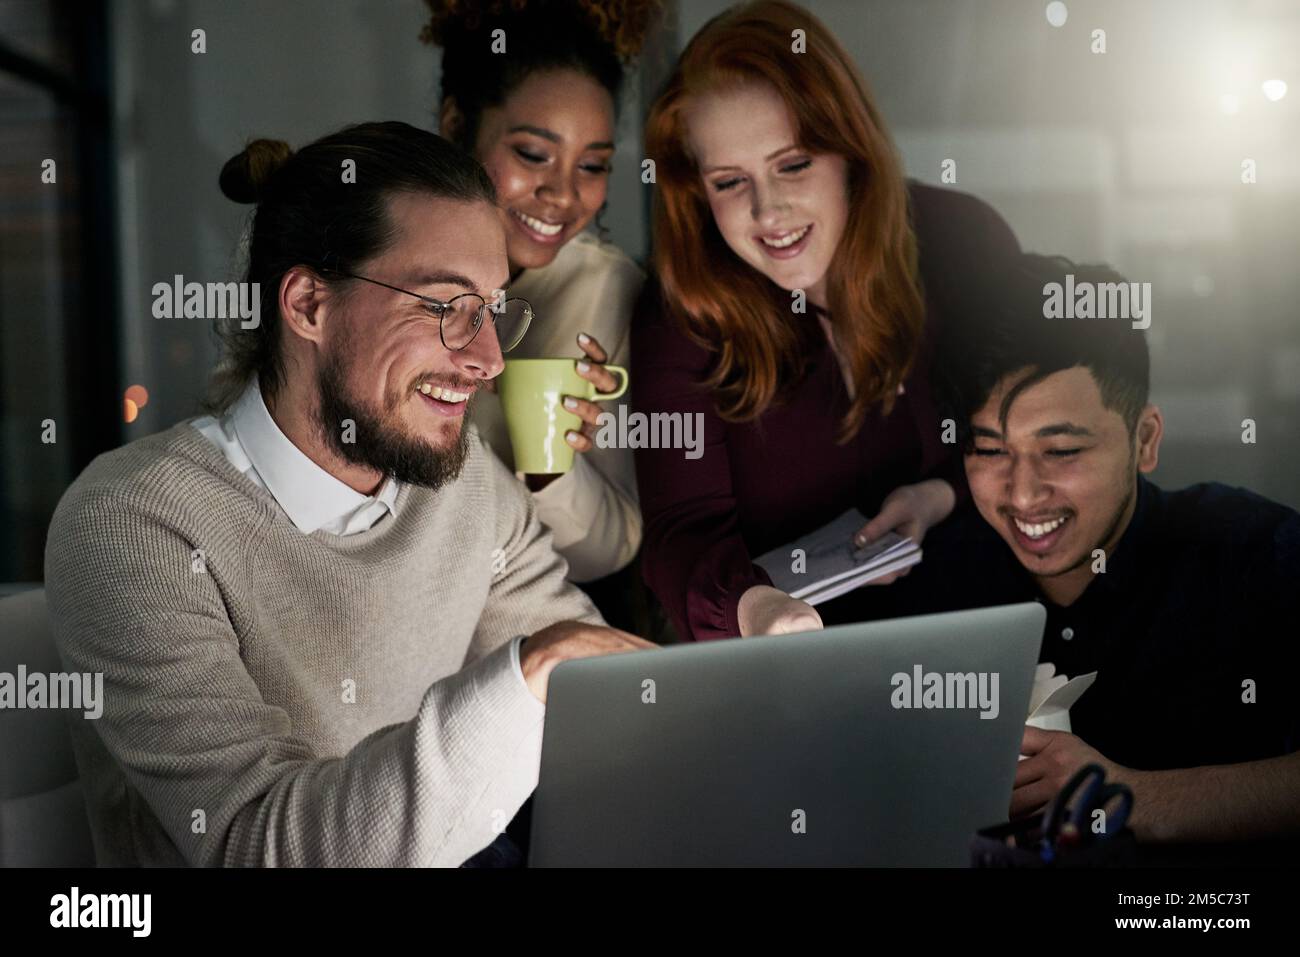 Designing is what makes them happy. a group of young designers working late in the office. Stock Photo